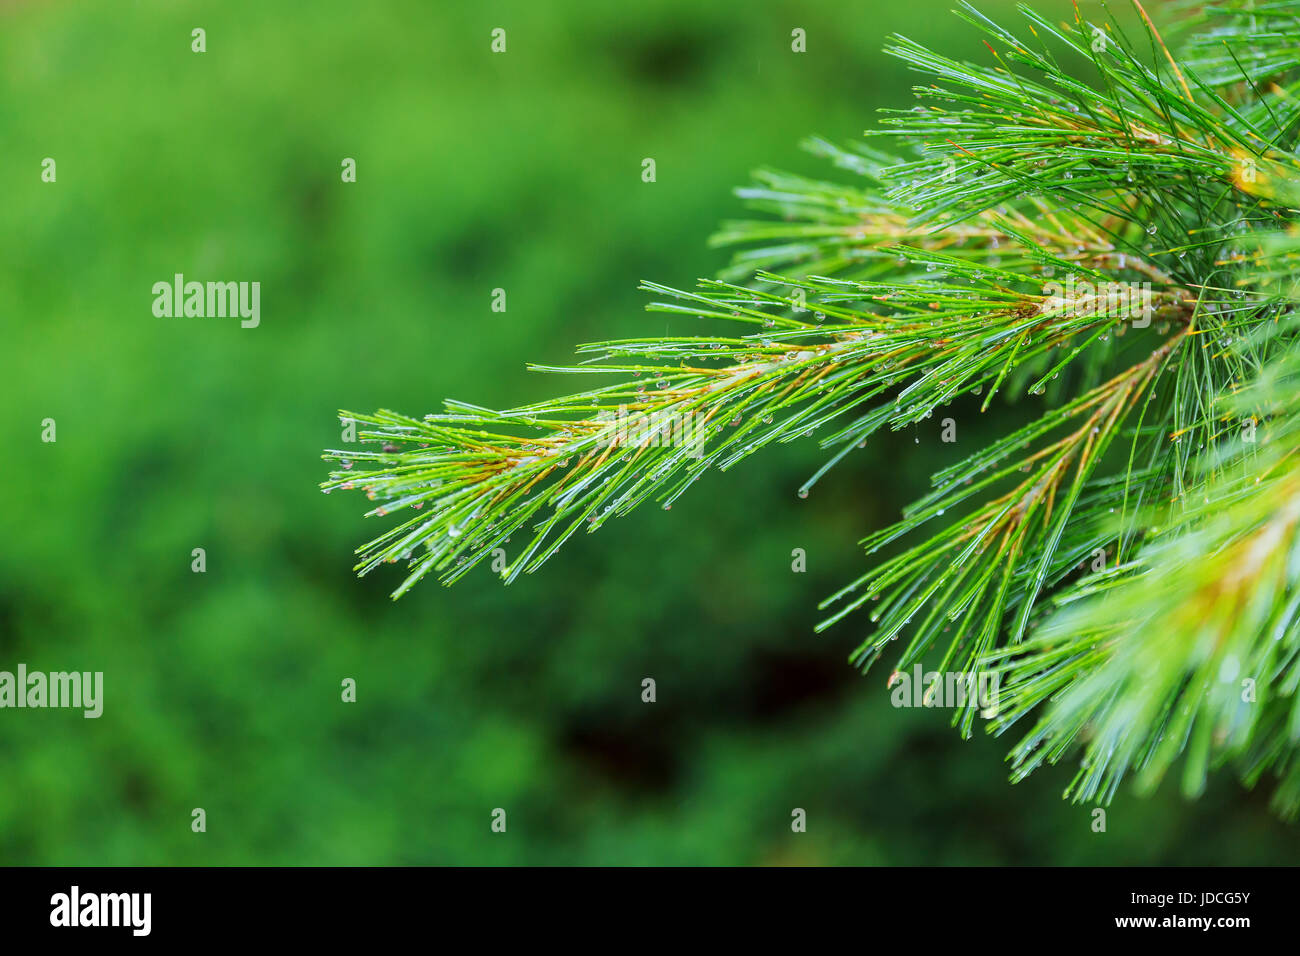 Close-up of pine branches with water drops Stock Photo